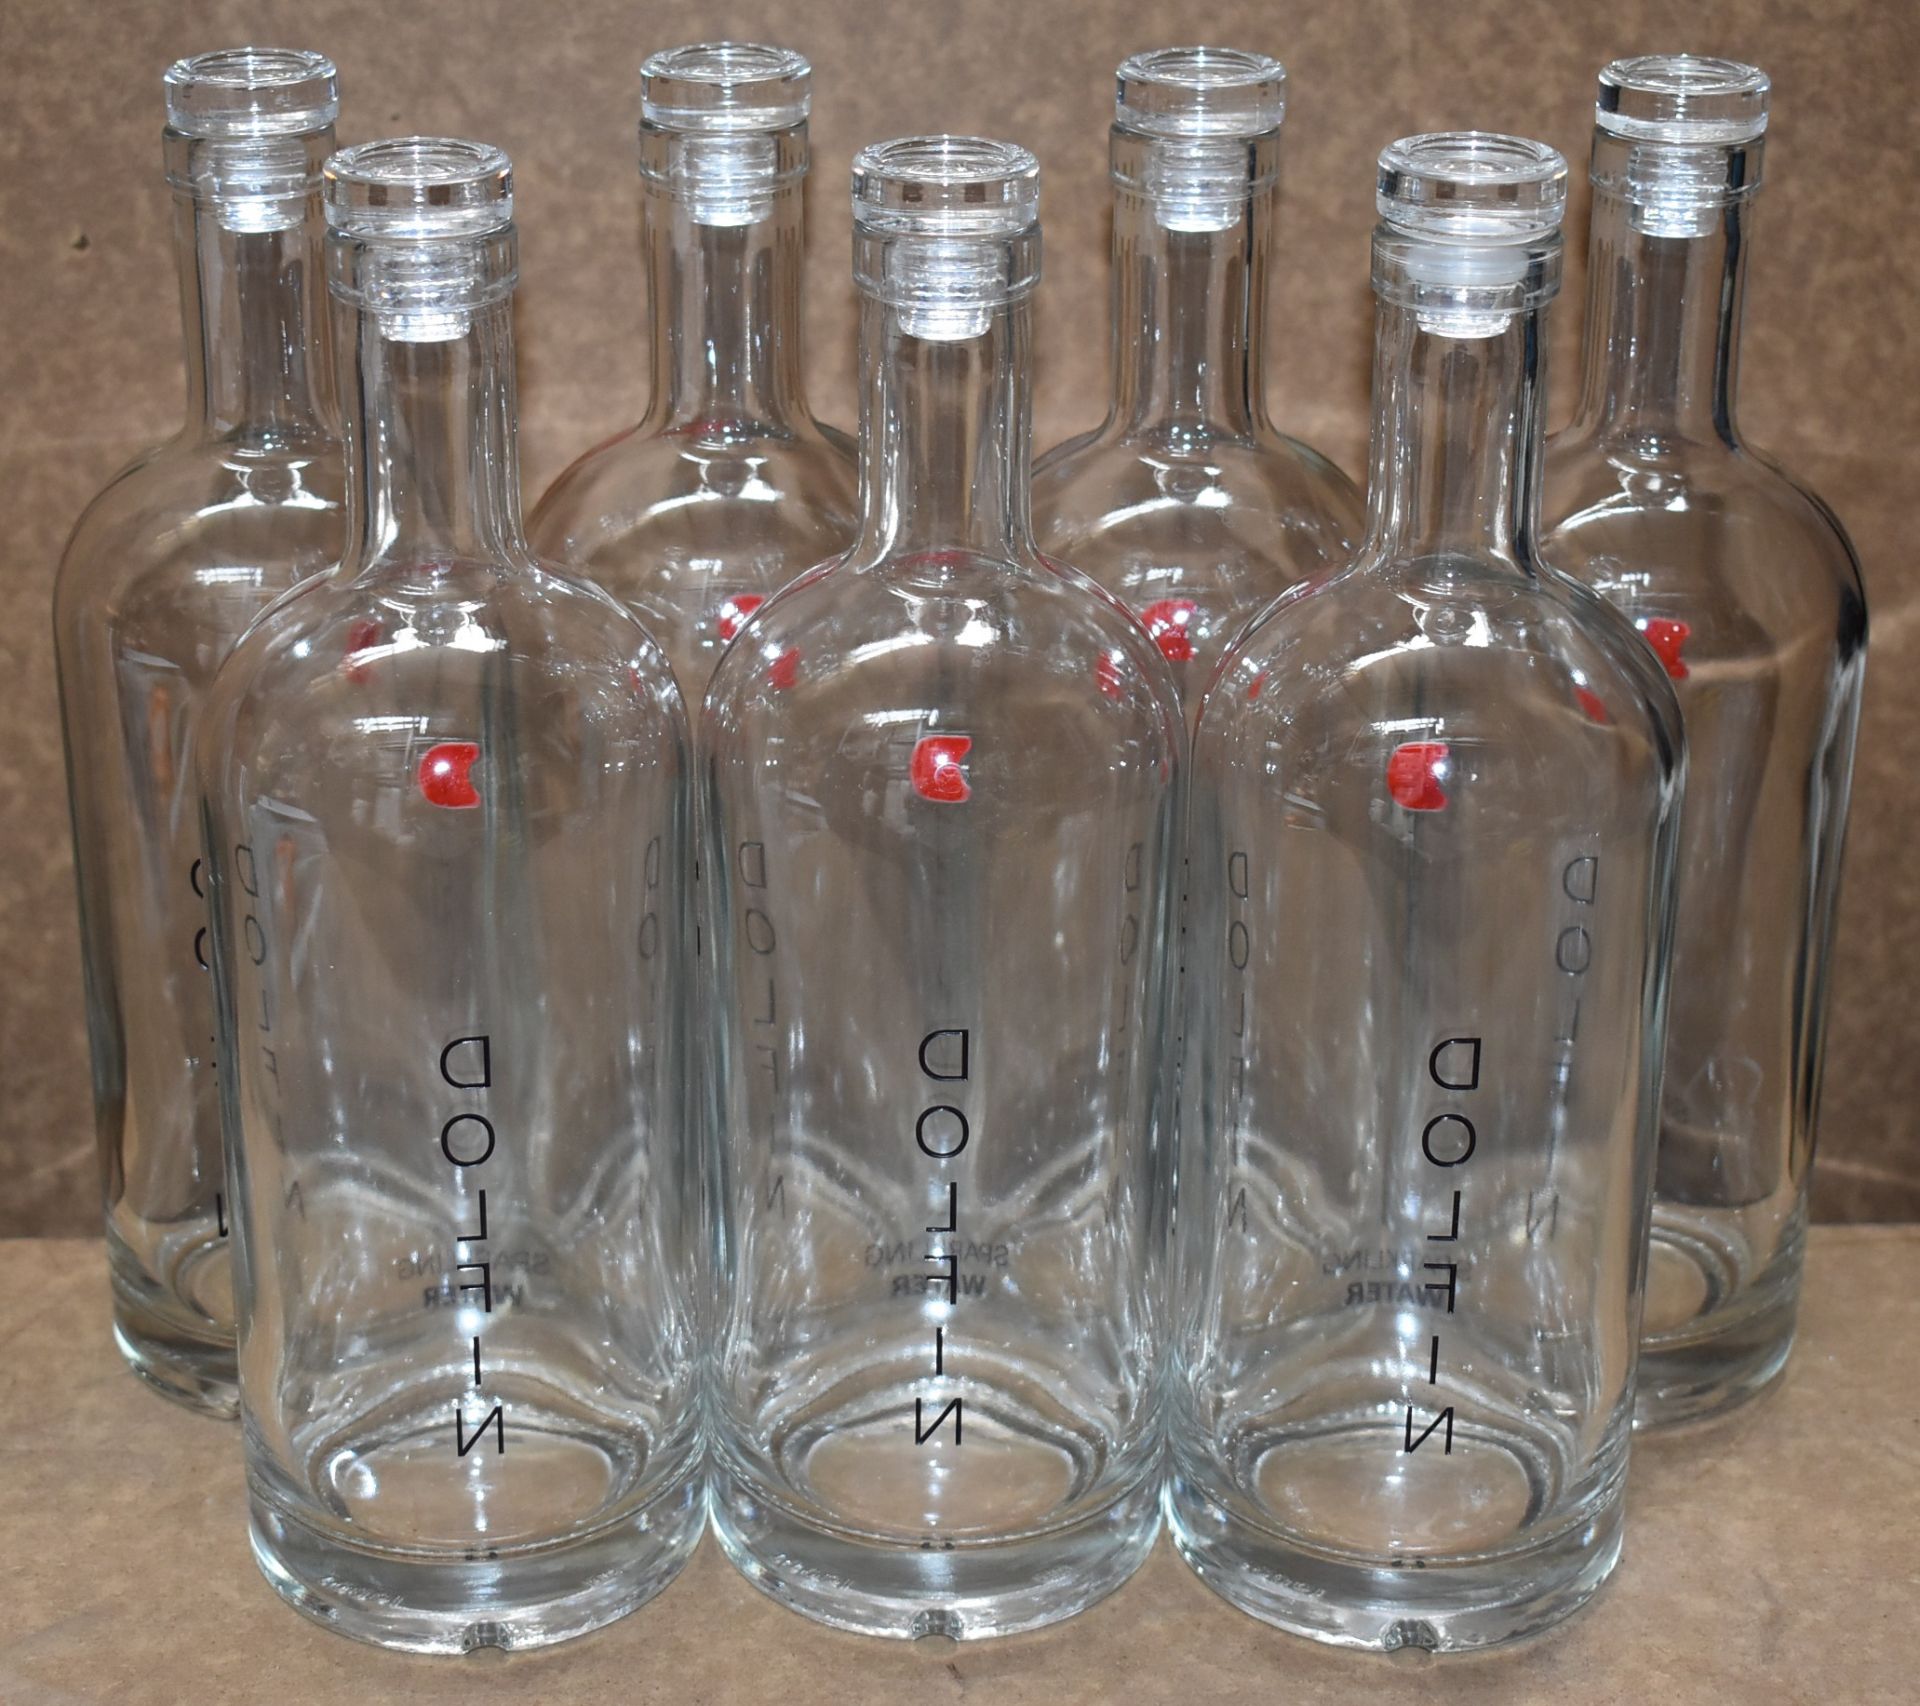 23 x Dolfin Glass Water Bottles With Glass Bottle Caps - Approx Bottle Height 28 cms - Ideal For